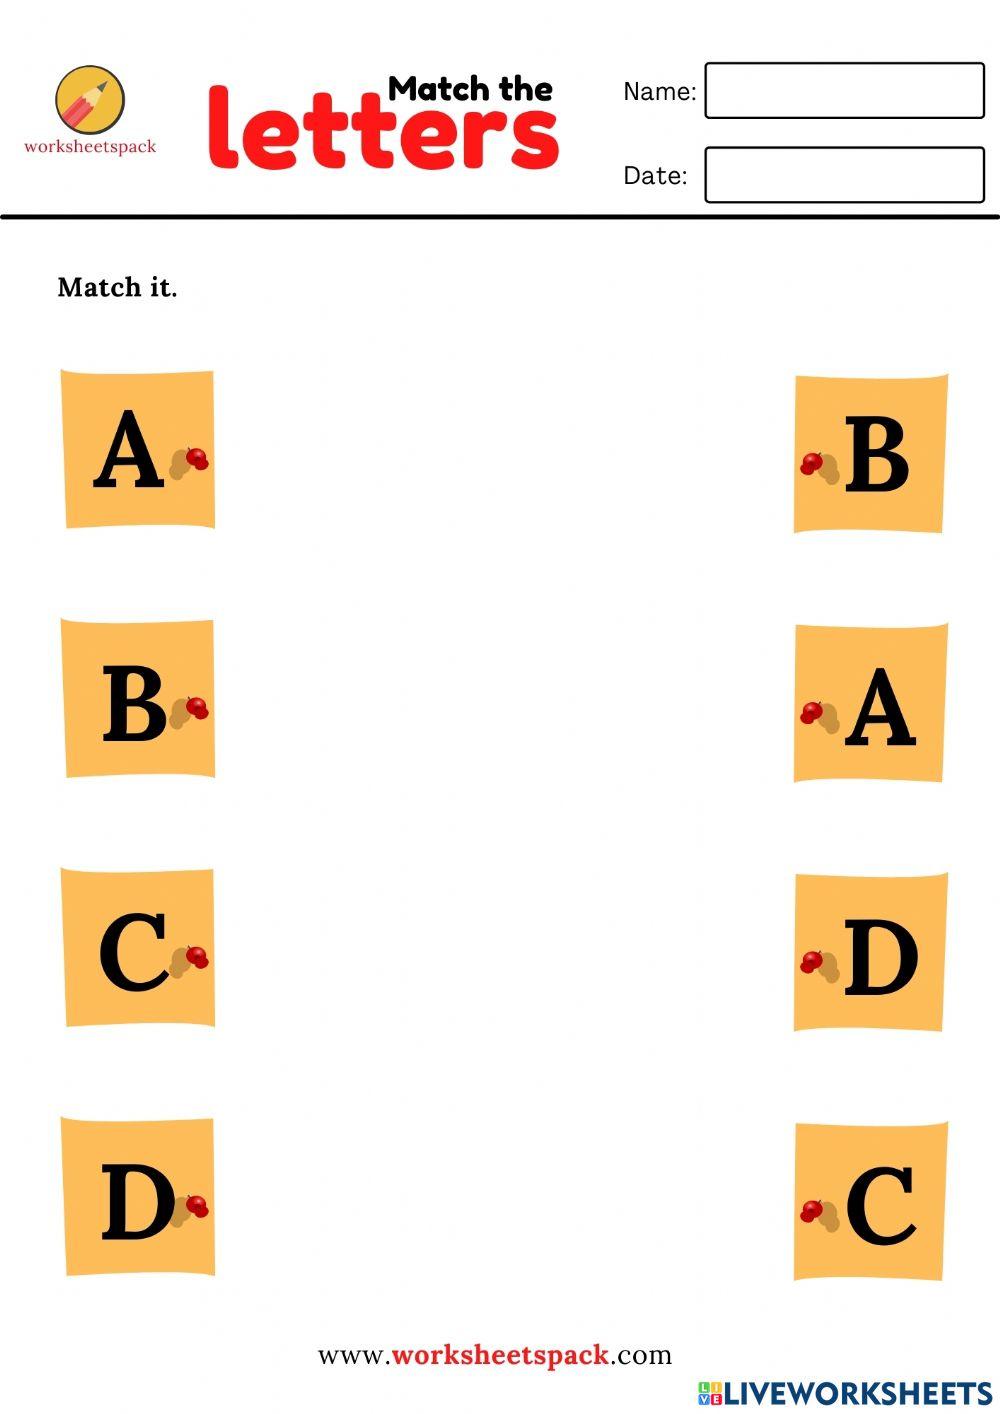 Alphabet matching worksheets - uppercase letters (A to D)